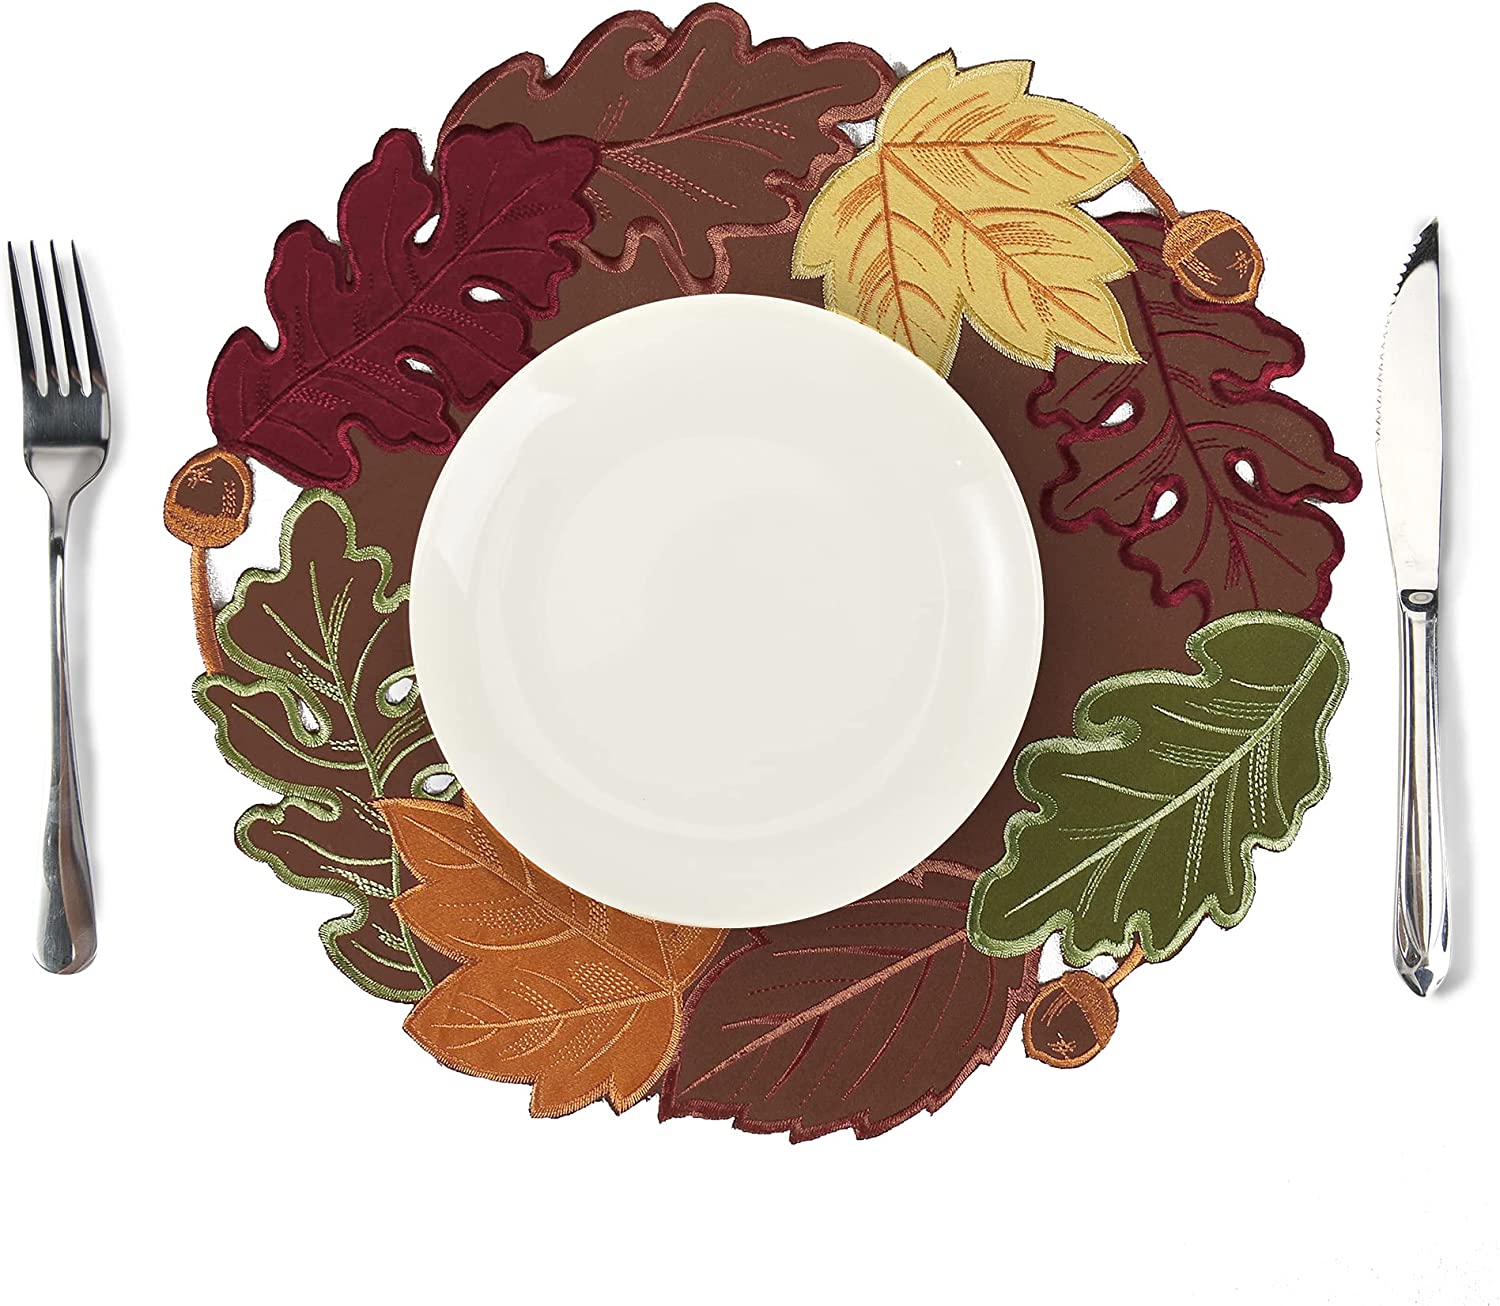 Set of 4 15" Table Placemats Fall Leaf Thanksgiving Doilies with Cutwork Applique Embroidery on Border